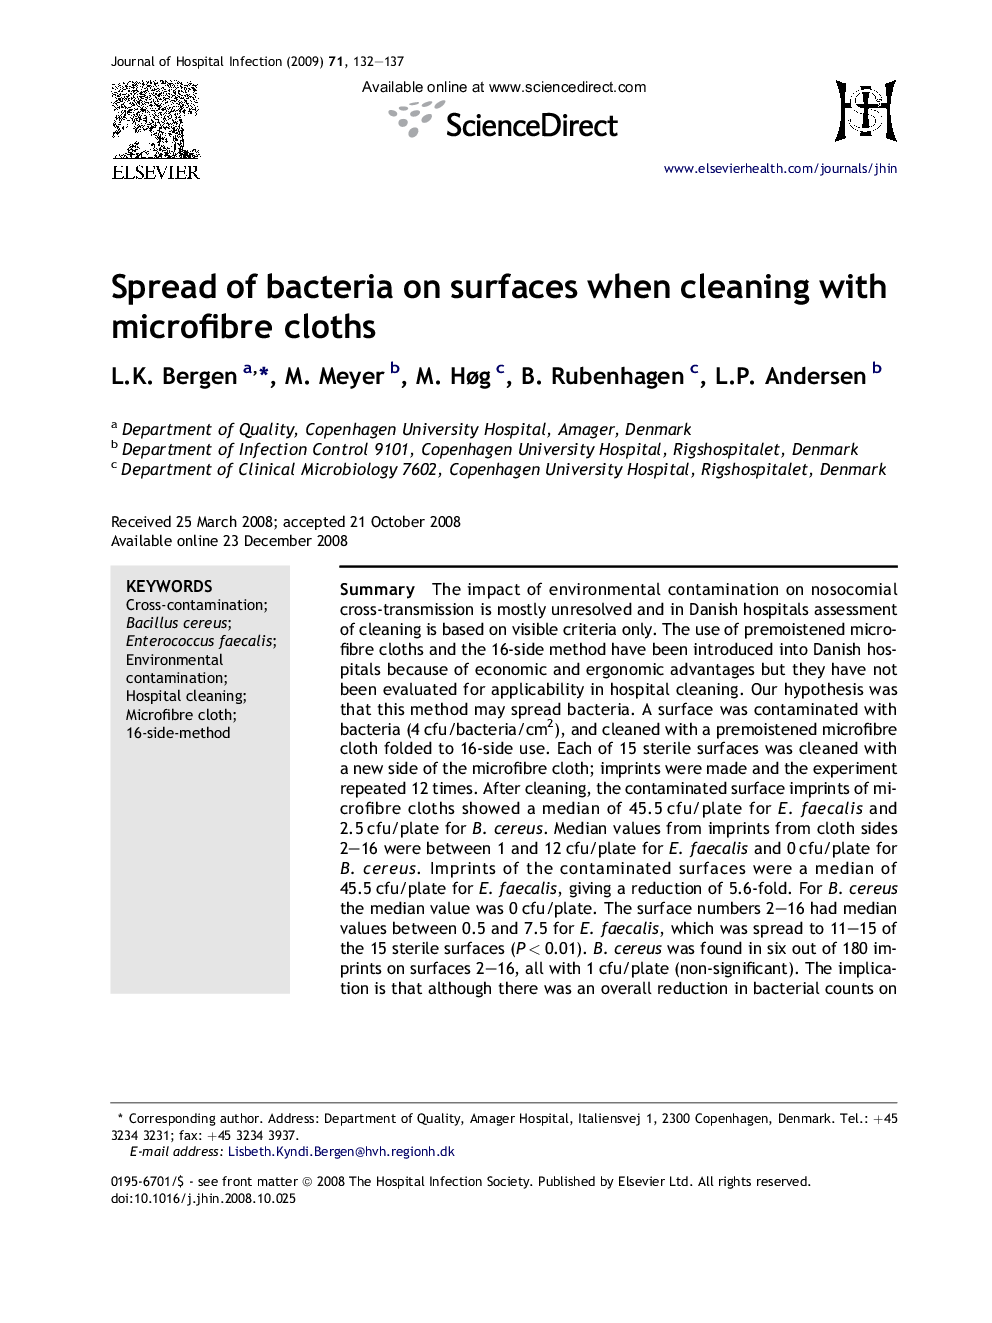 Spread of bacteria on surfaces when cleaning with microfibre cloths